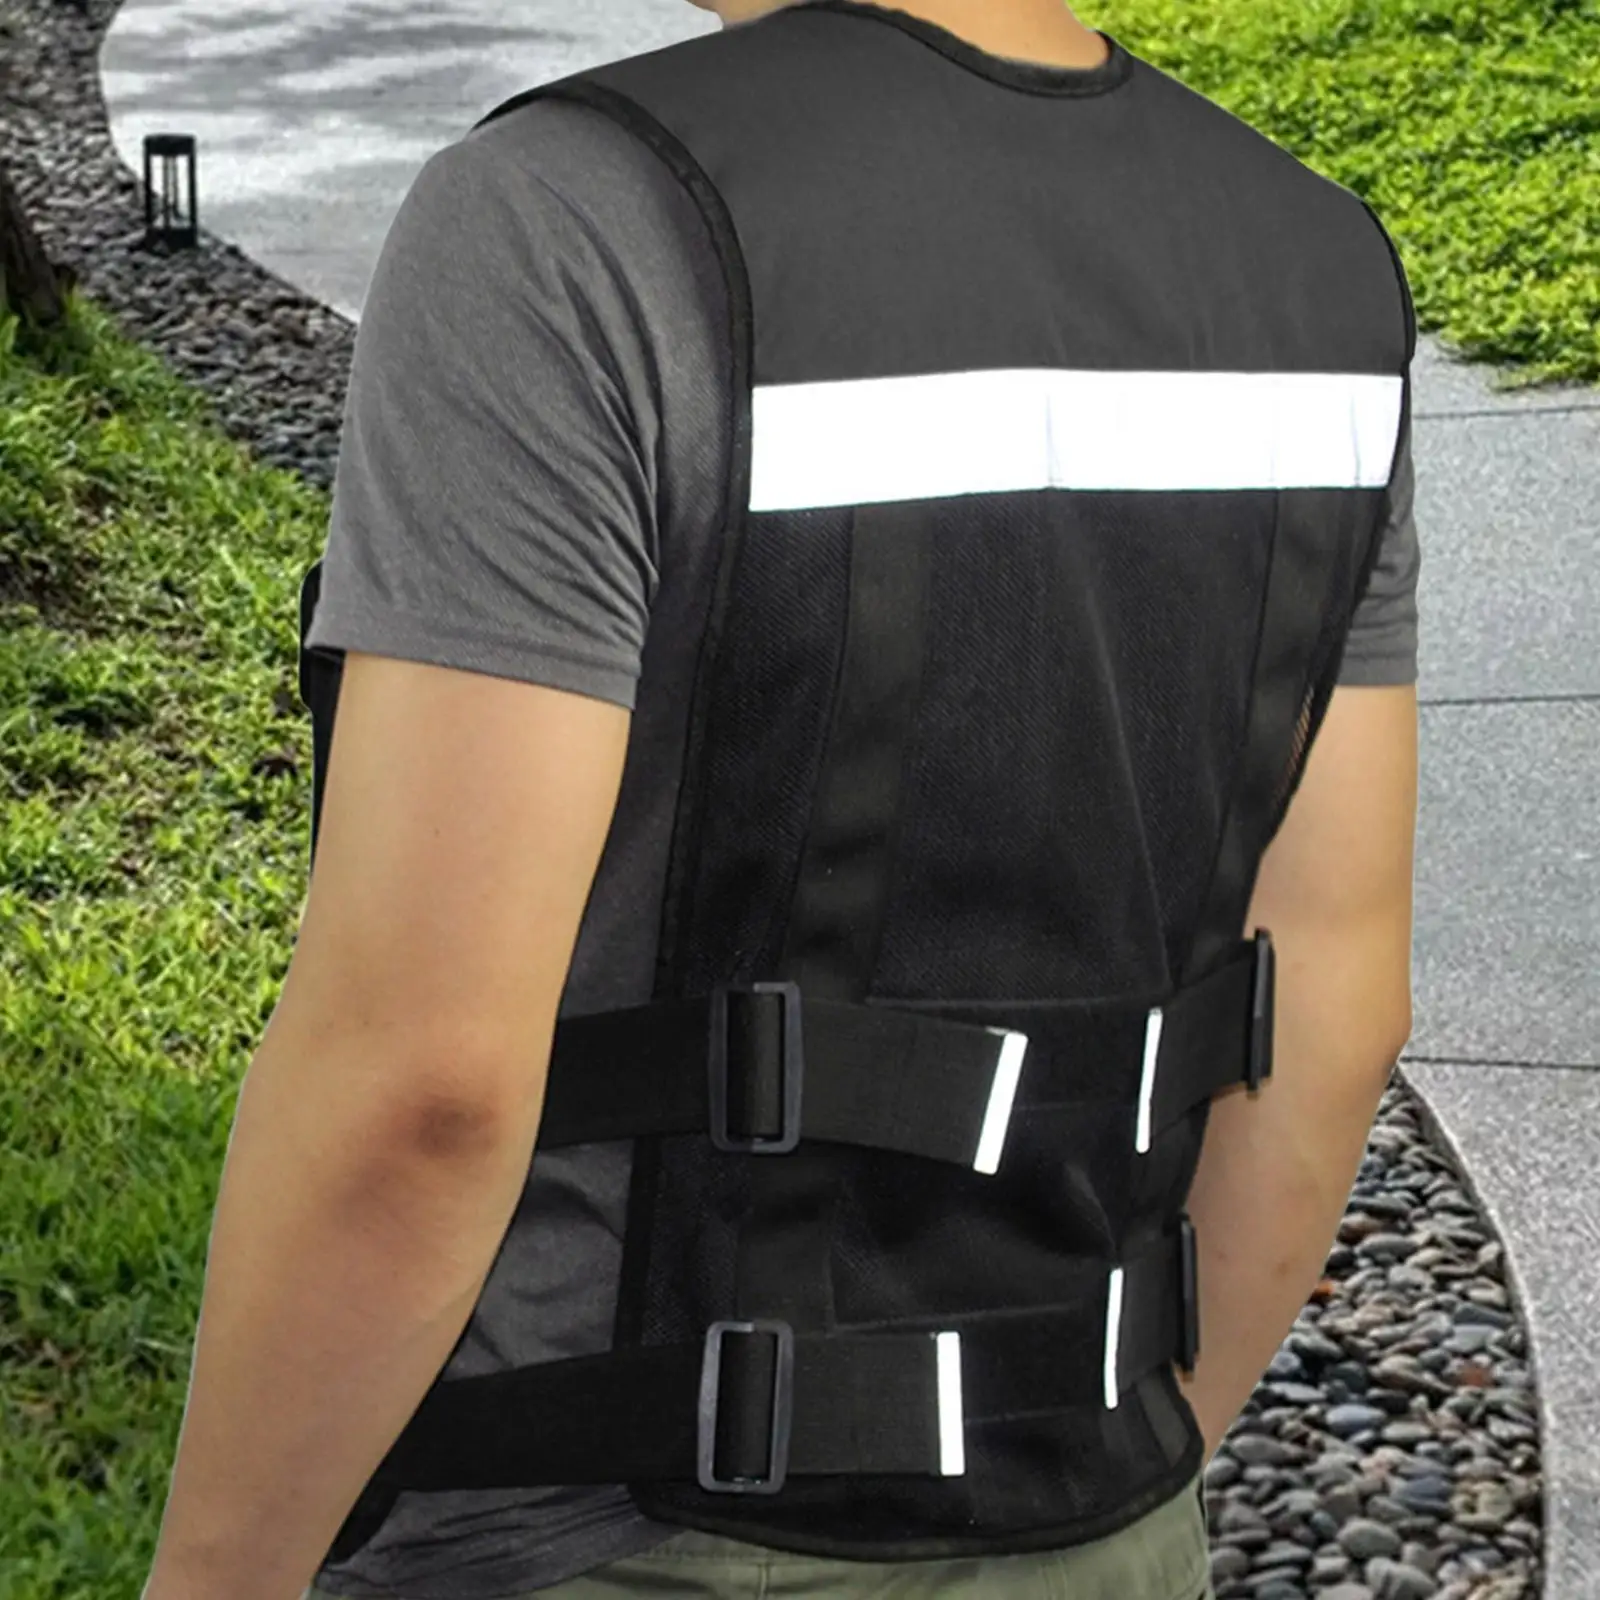 Reflective Safety Vest with Reflective Strips Construction Vest for Running Motorcycle Riding Walking at Night Outdoor